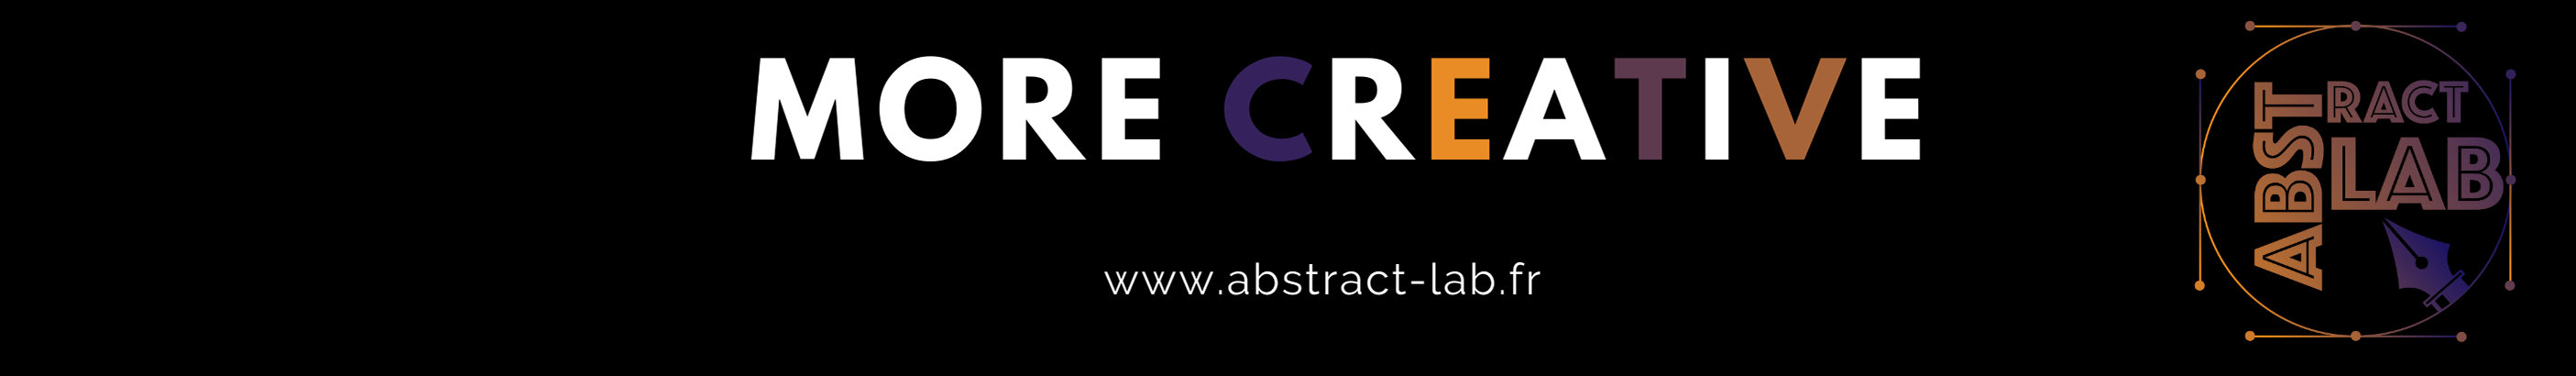 Abstract Lab's profile banner